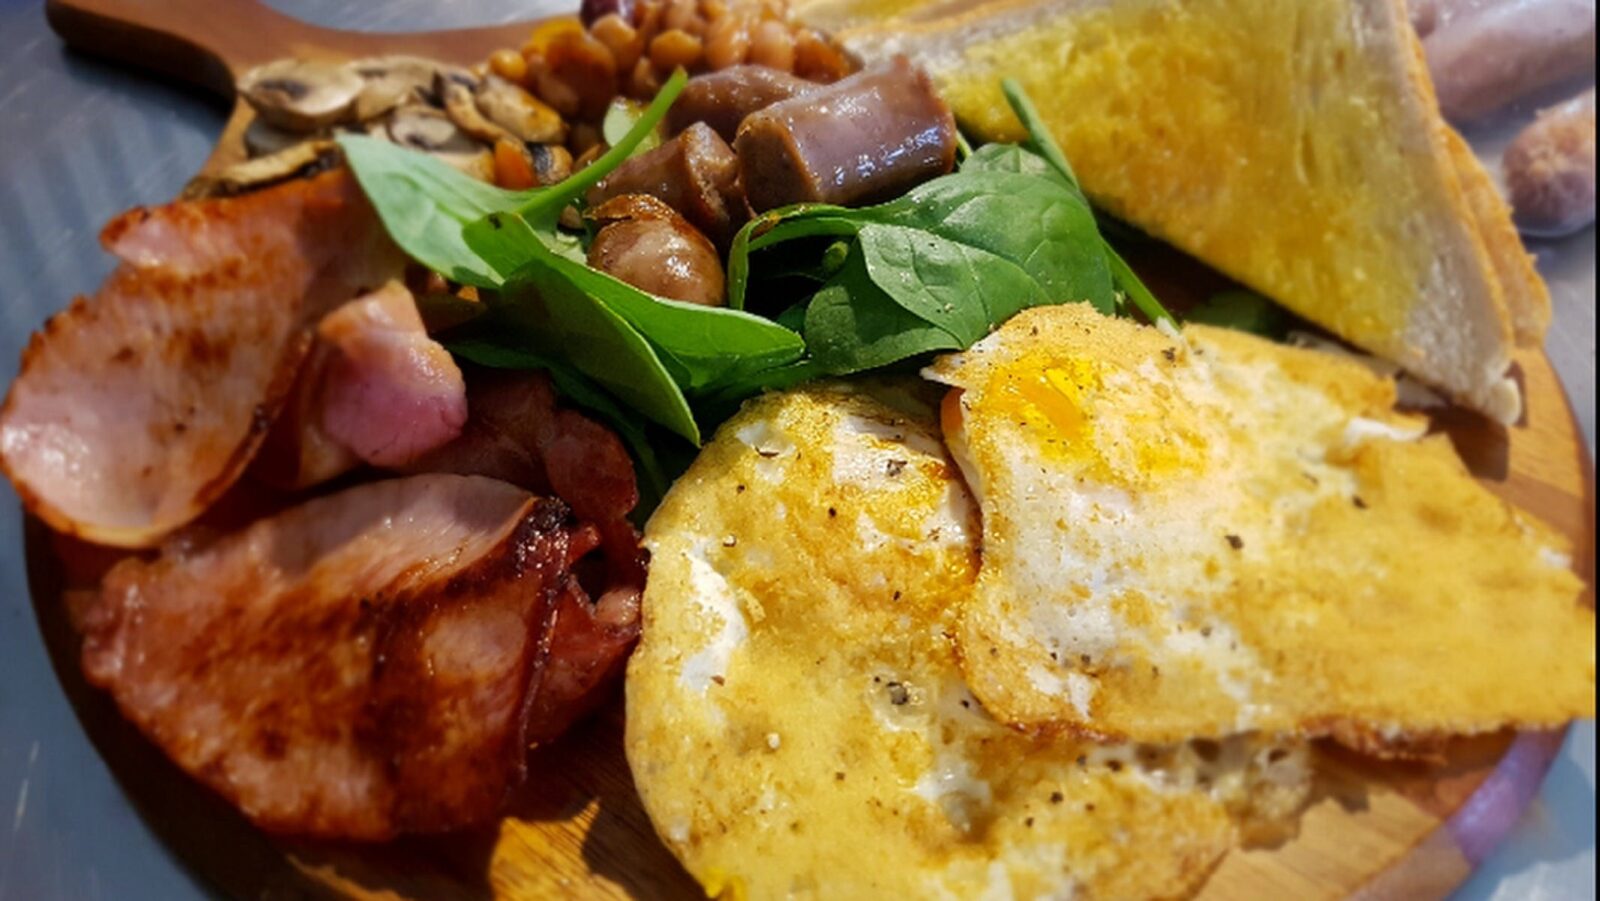 Breakfast assortment at Le Coffee House Campbelltown